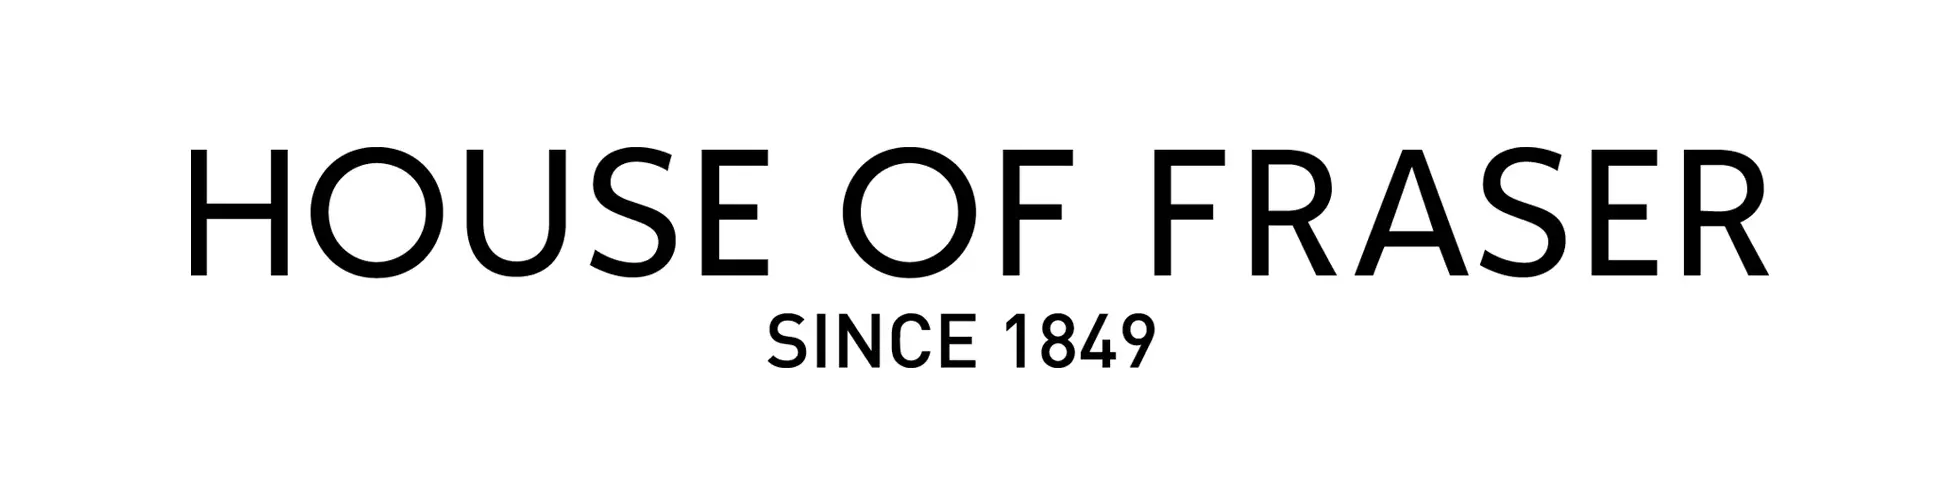 Win £50 to spend at house of fraser